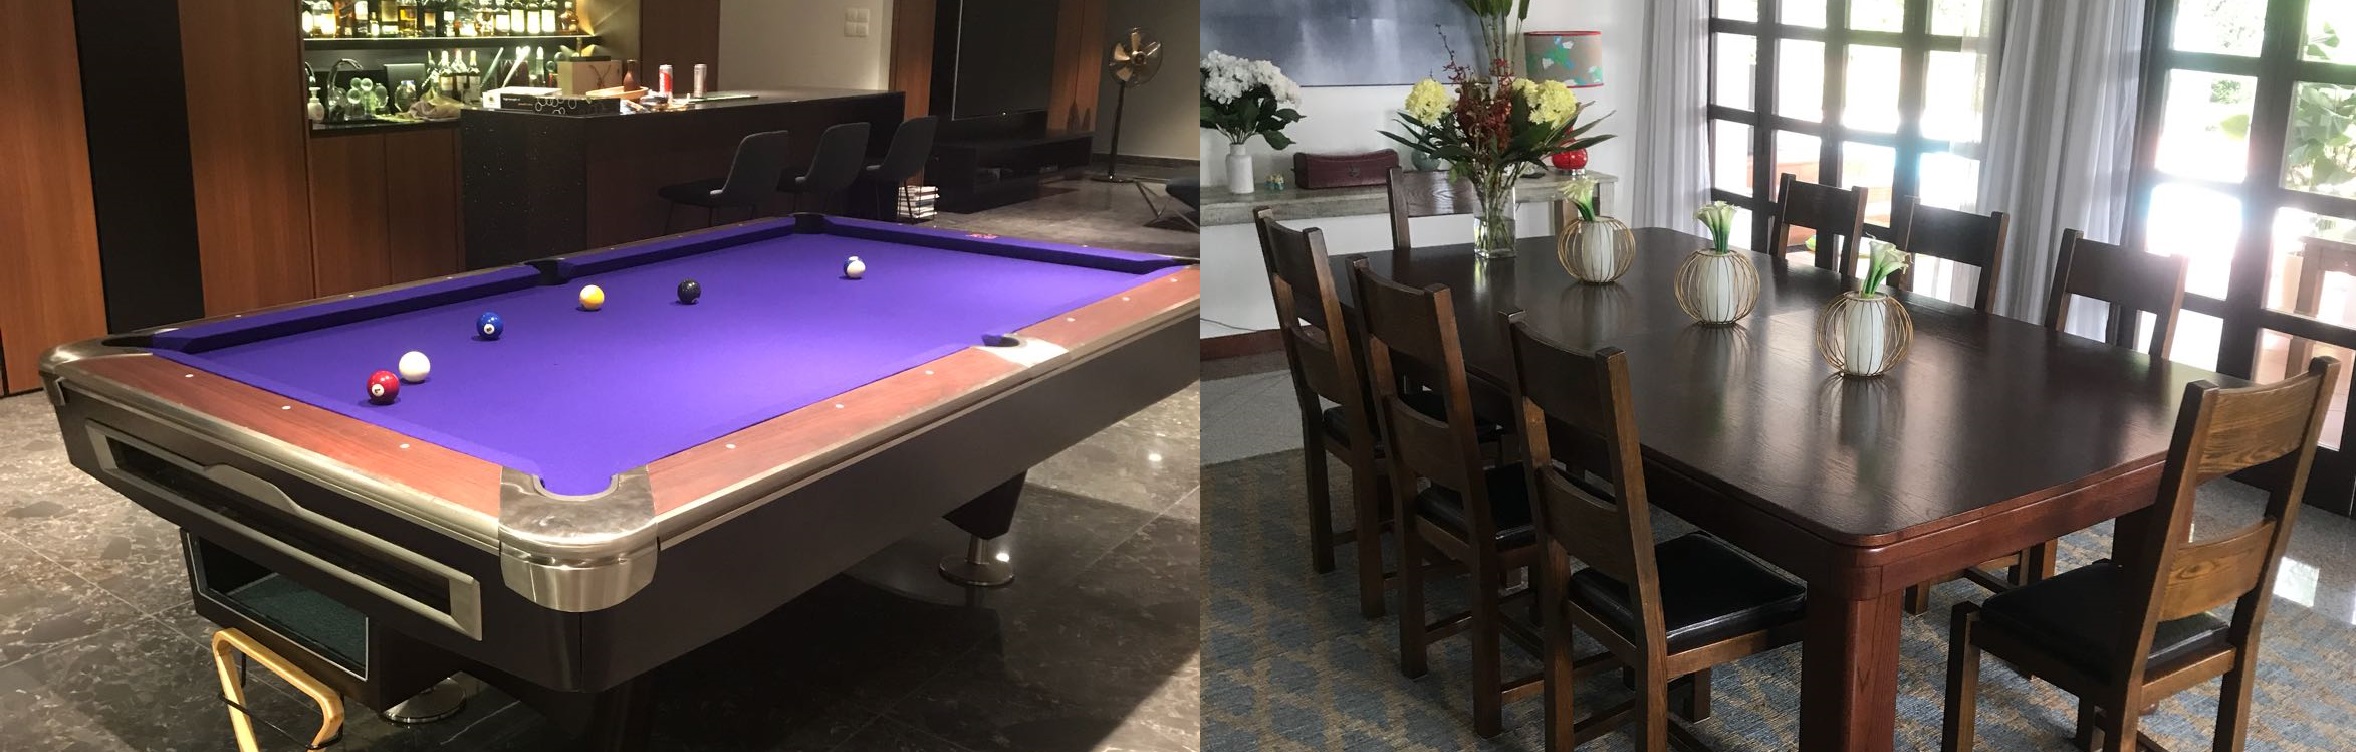 Pool Table / Dining Pool Table